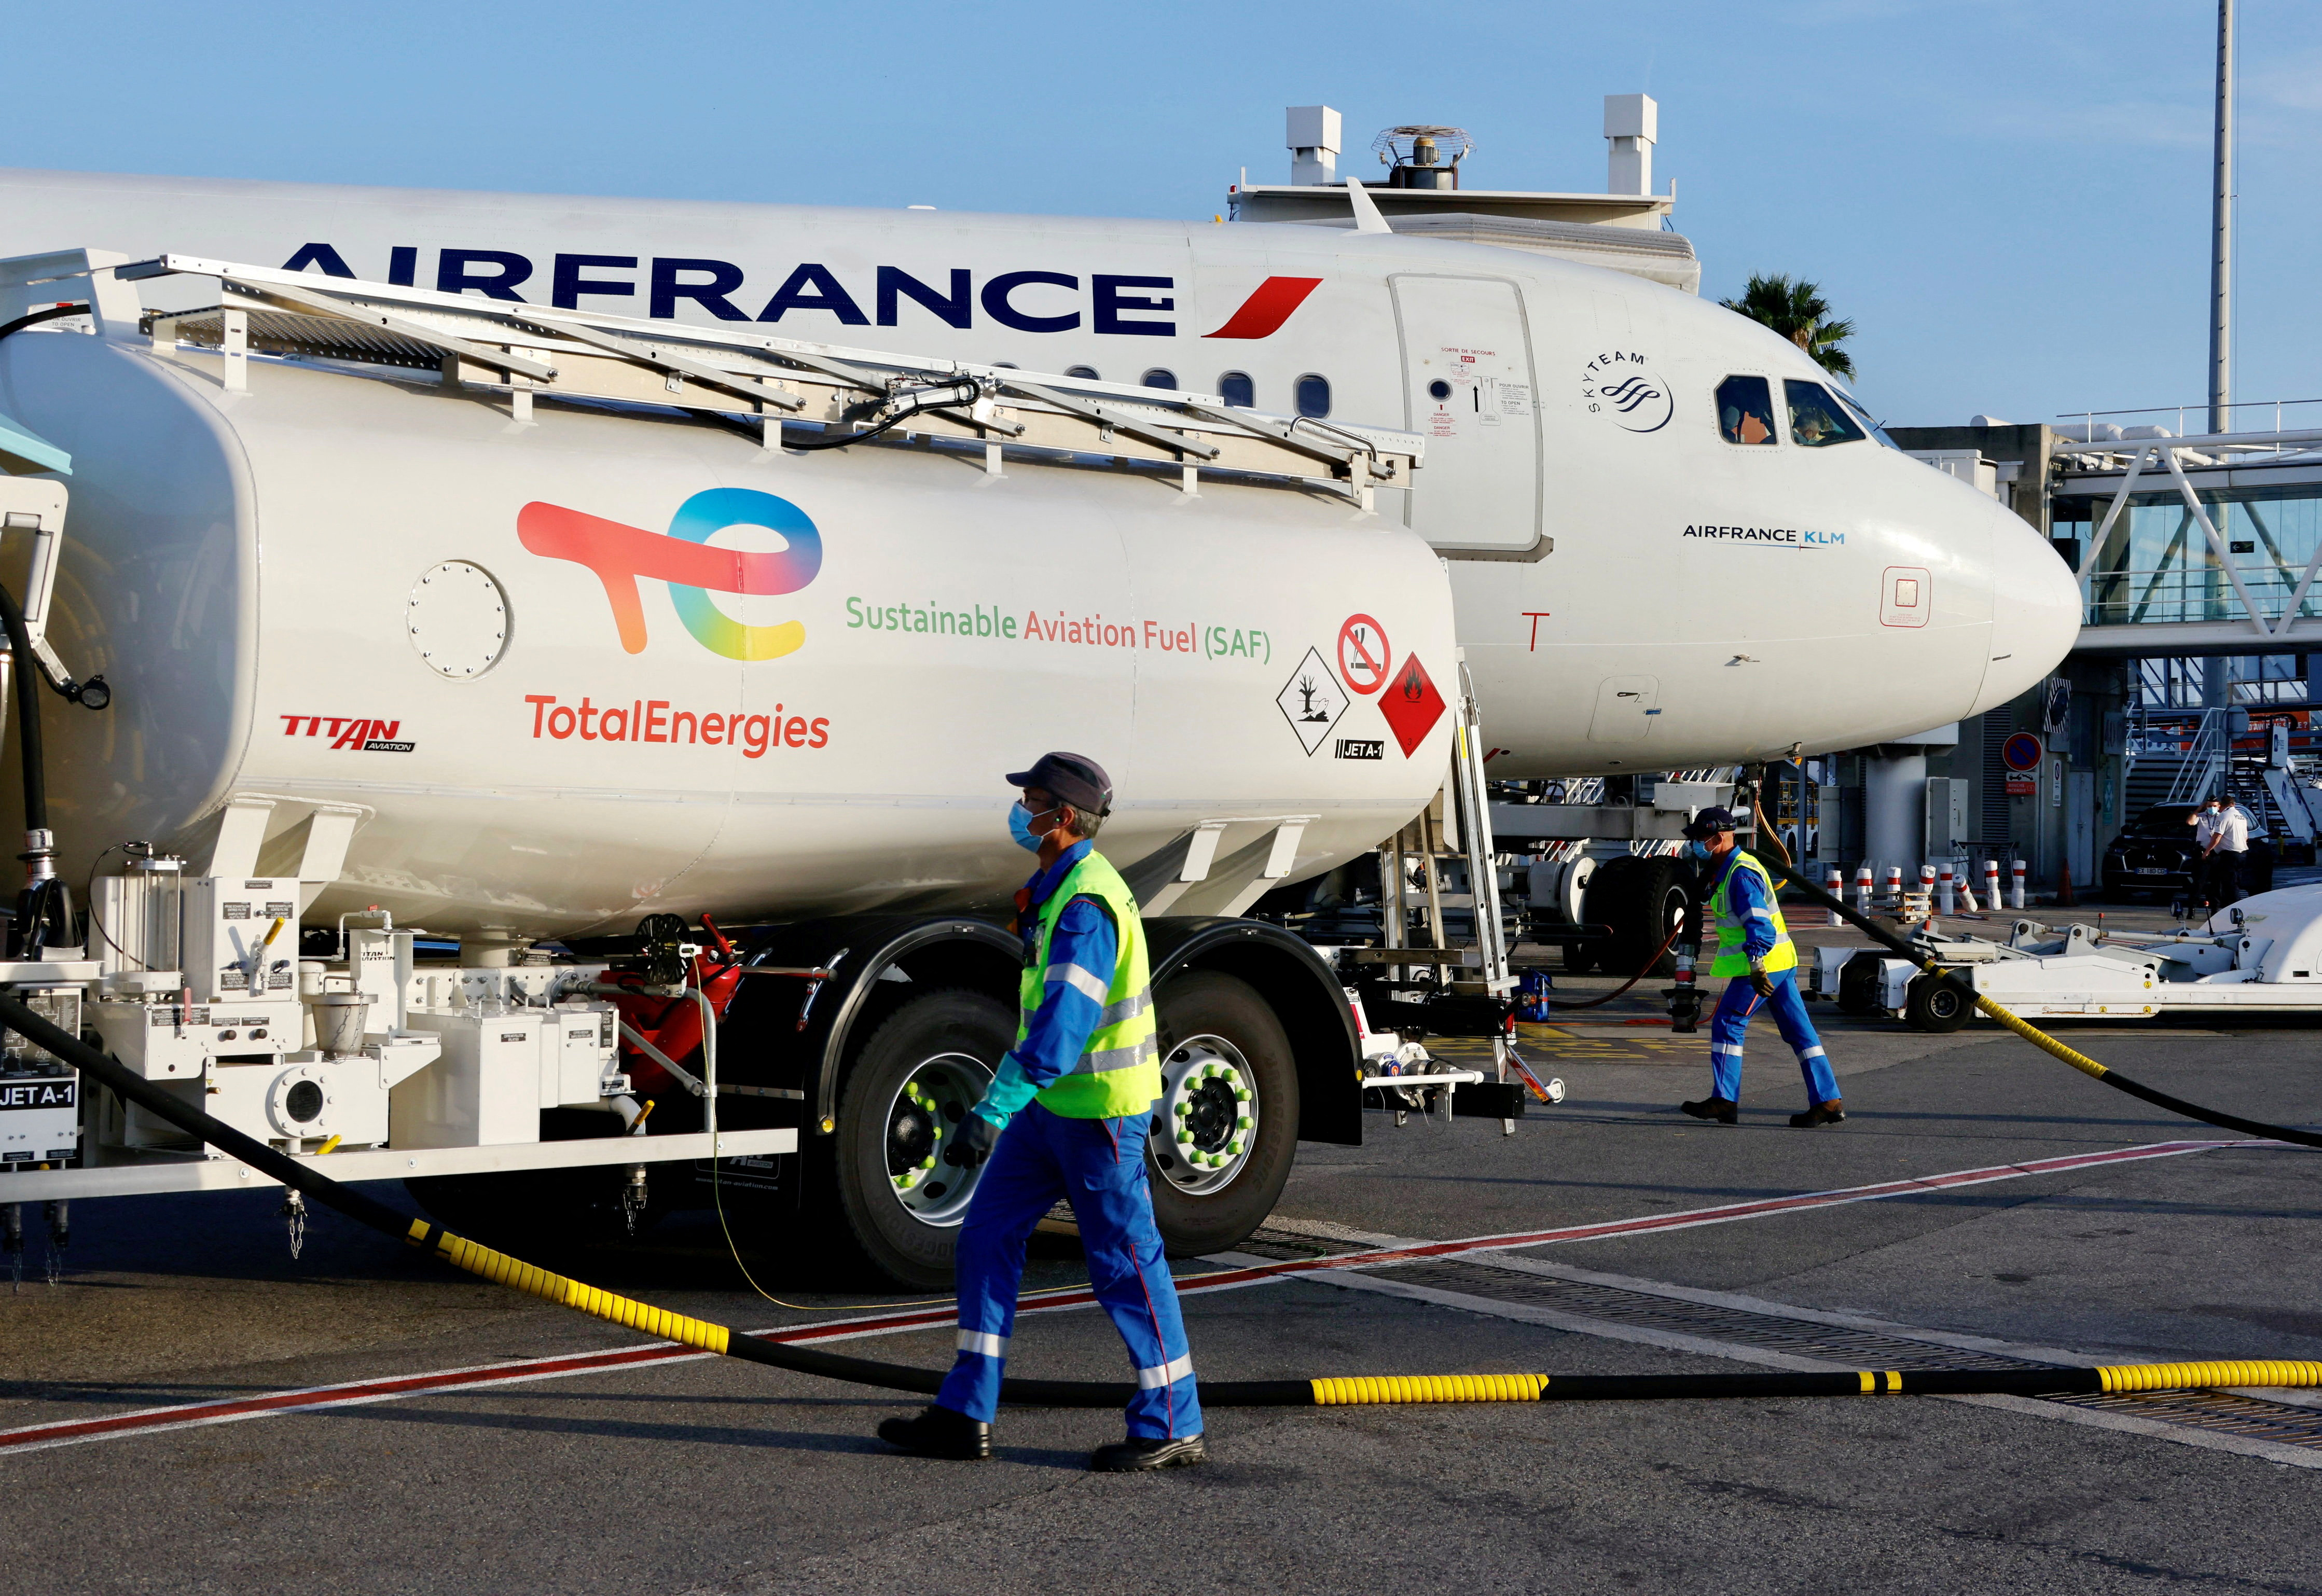 Air France aircraft, operated with SAF is refueled at Nice airport